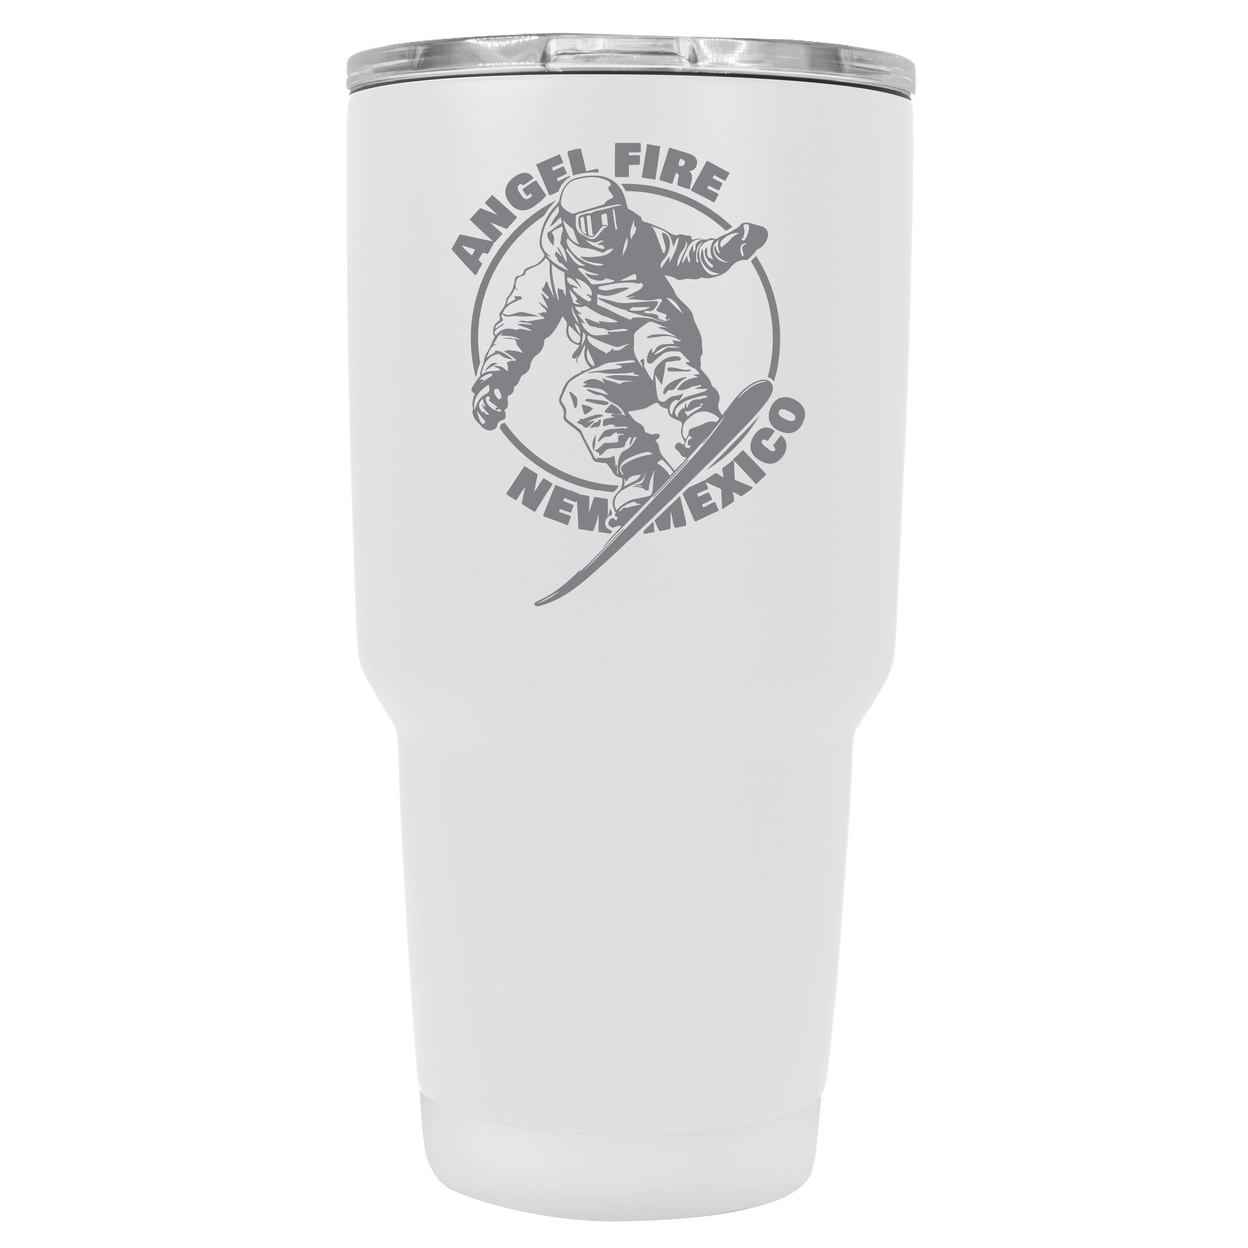 Angel Fire New Mexico Souvenir 24 Oz Engraved Insulated Stainless Steel Tumbler - Seafoam,,4-Pack